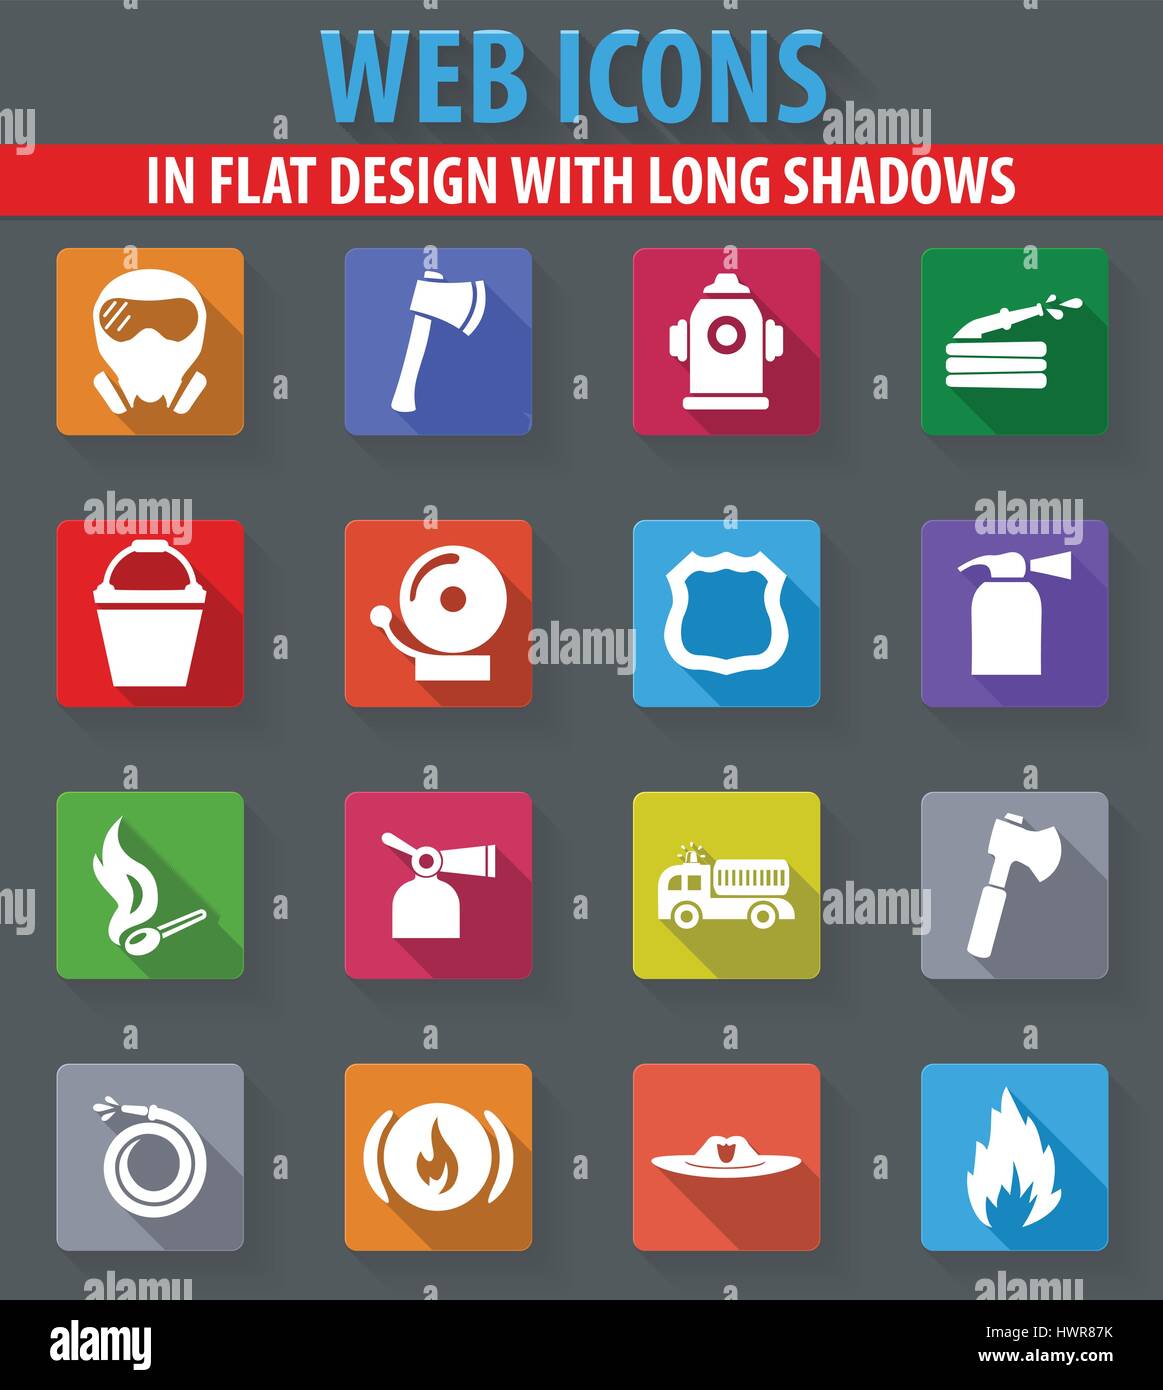 Fire brigade web icons in flat design with long shadows Stock Vector